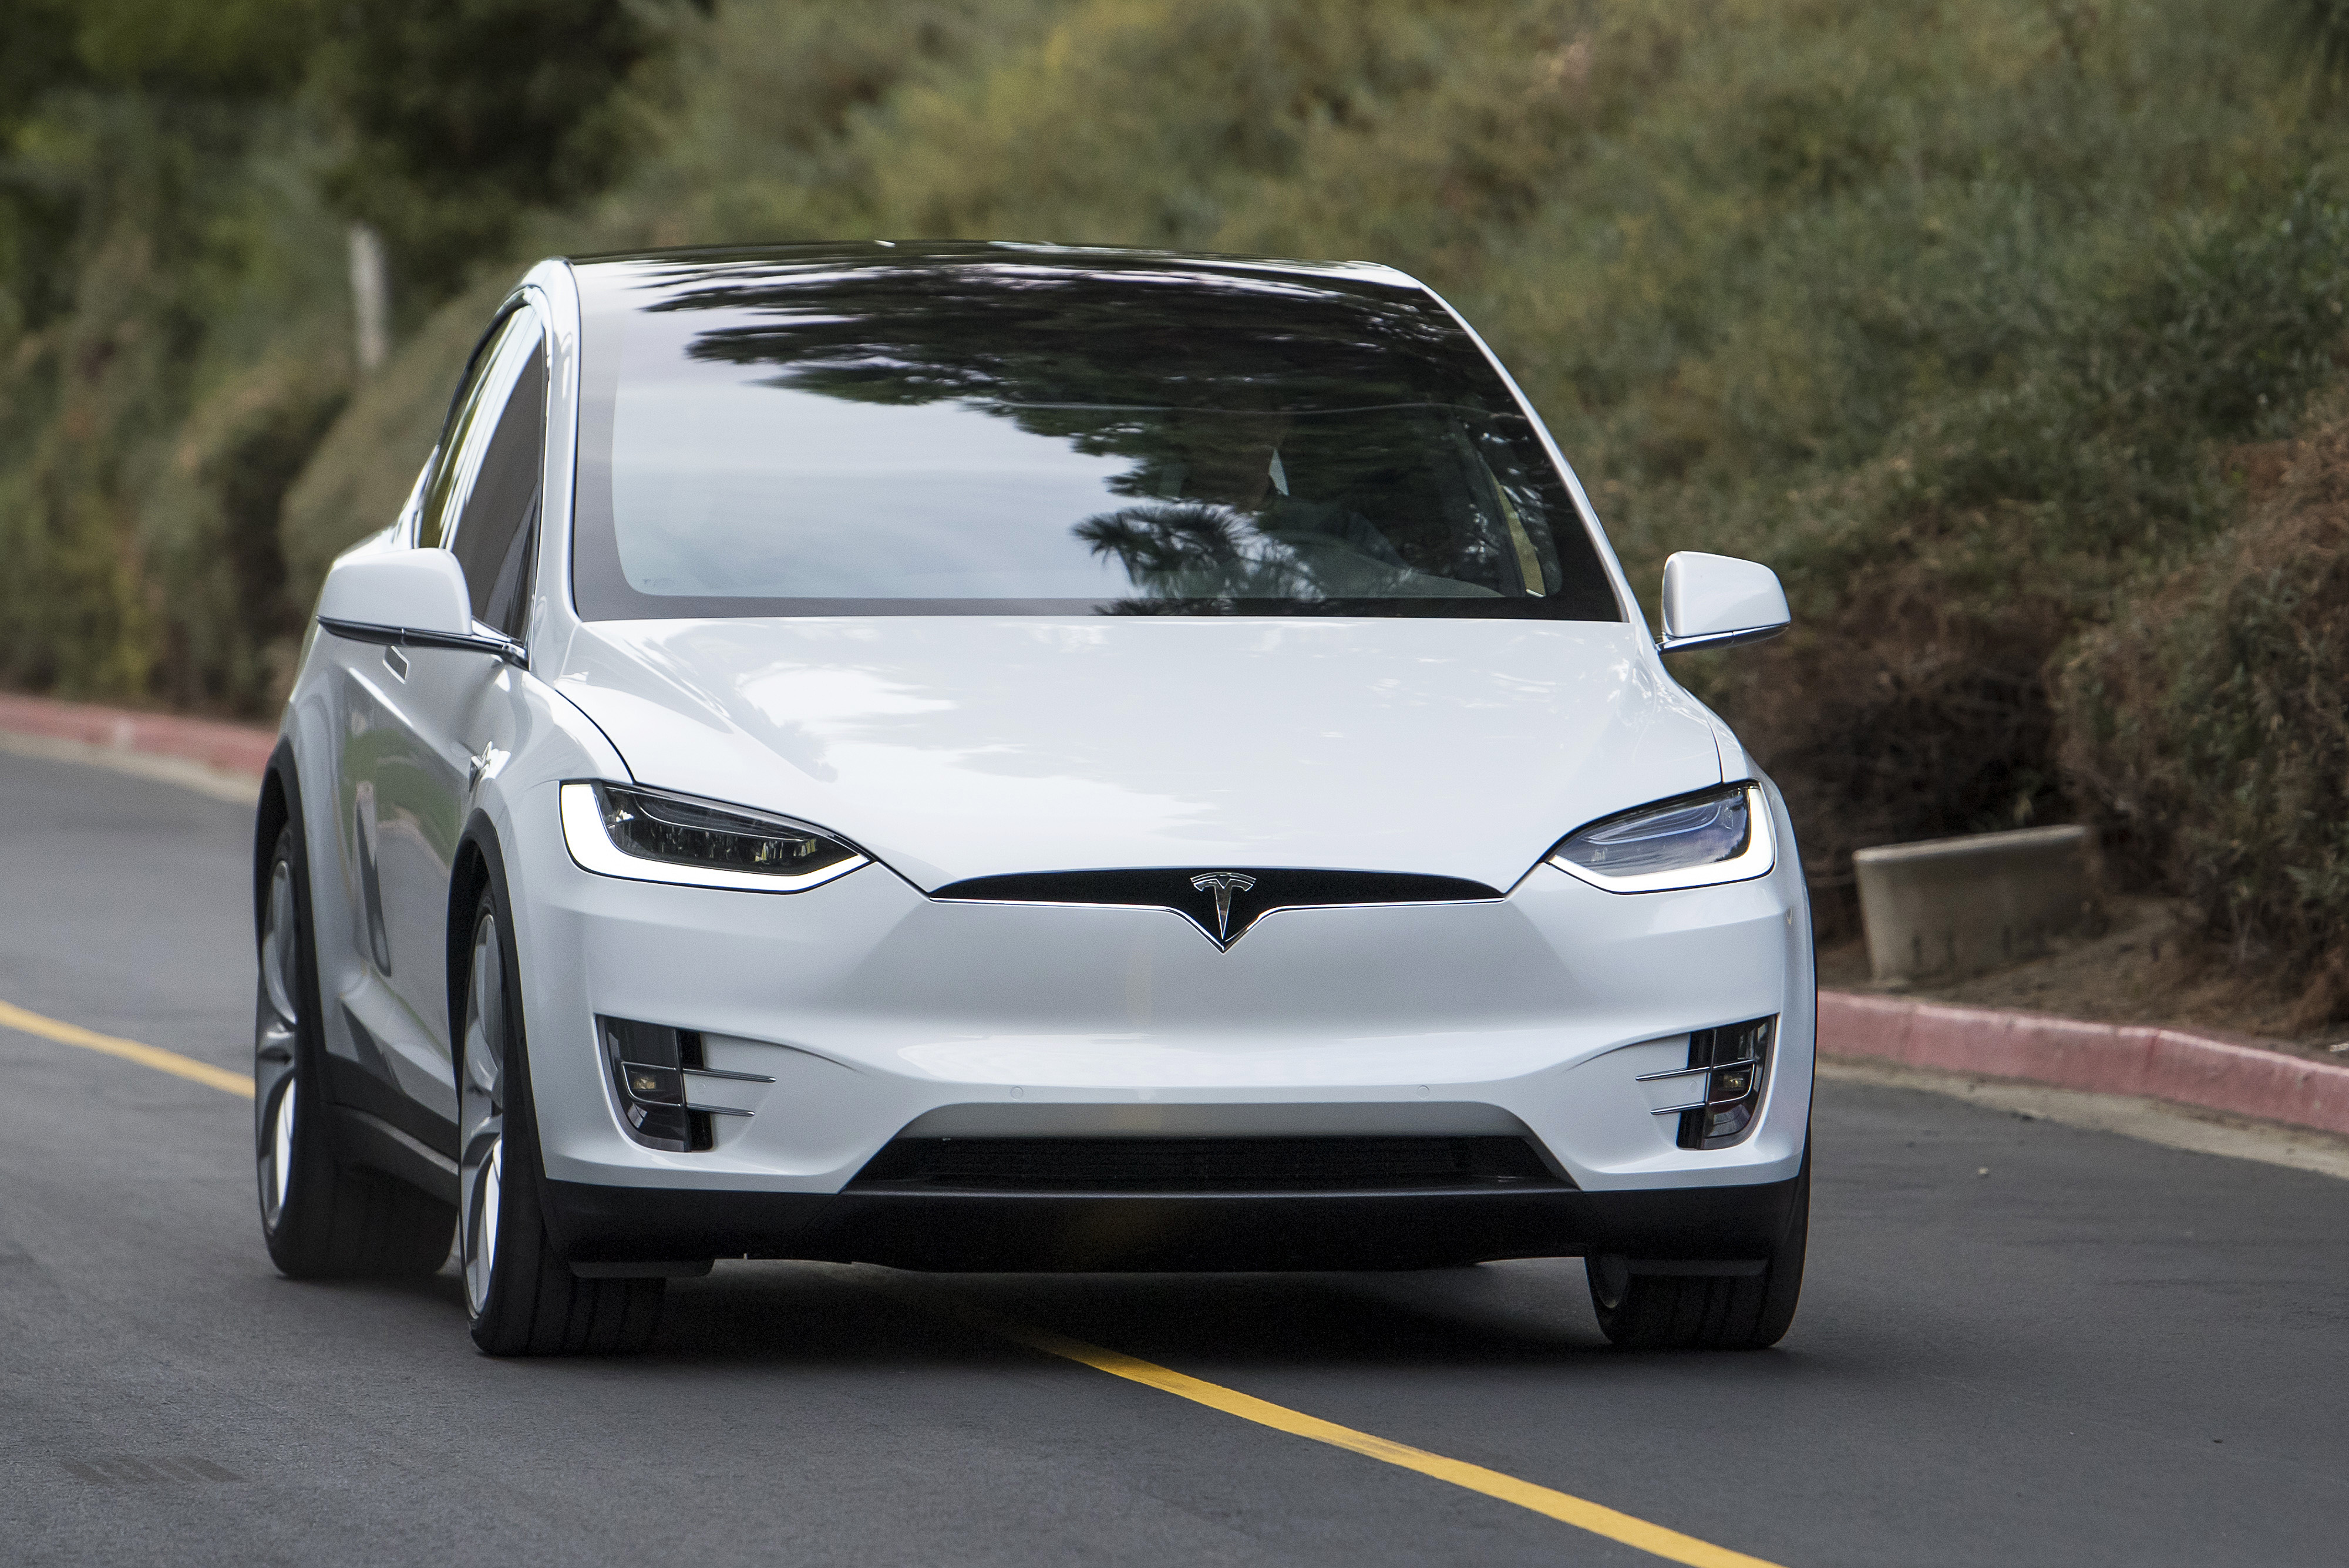 The Tesla Motors Inc. Model X sport utility vehicle (SUV) is driven during an event in Fremont, California, U.S., on Tuesday, Sept. 29, 2015. (Bloomberg/Getty Images)